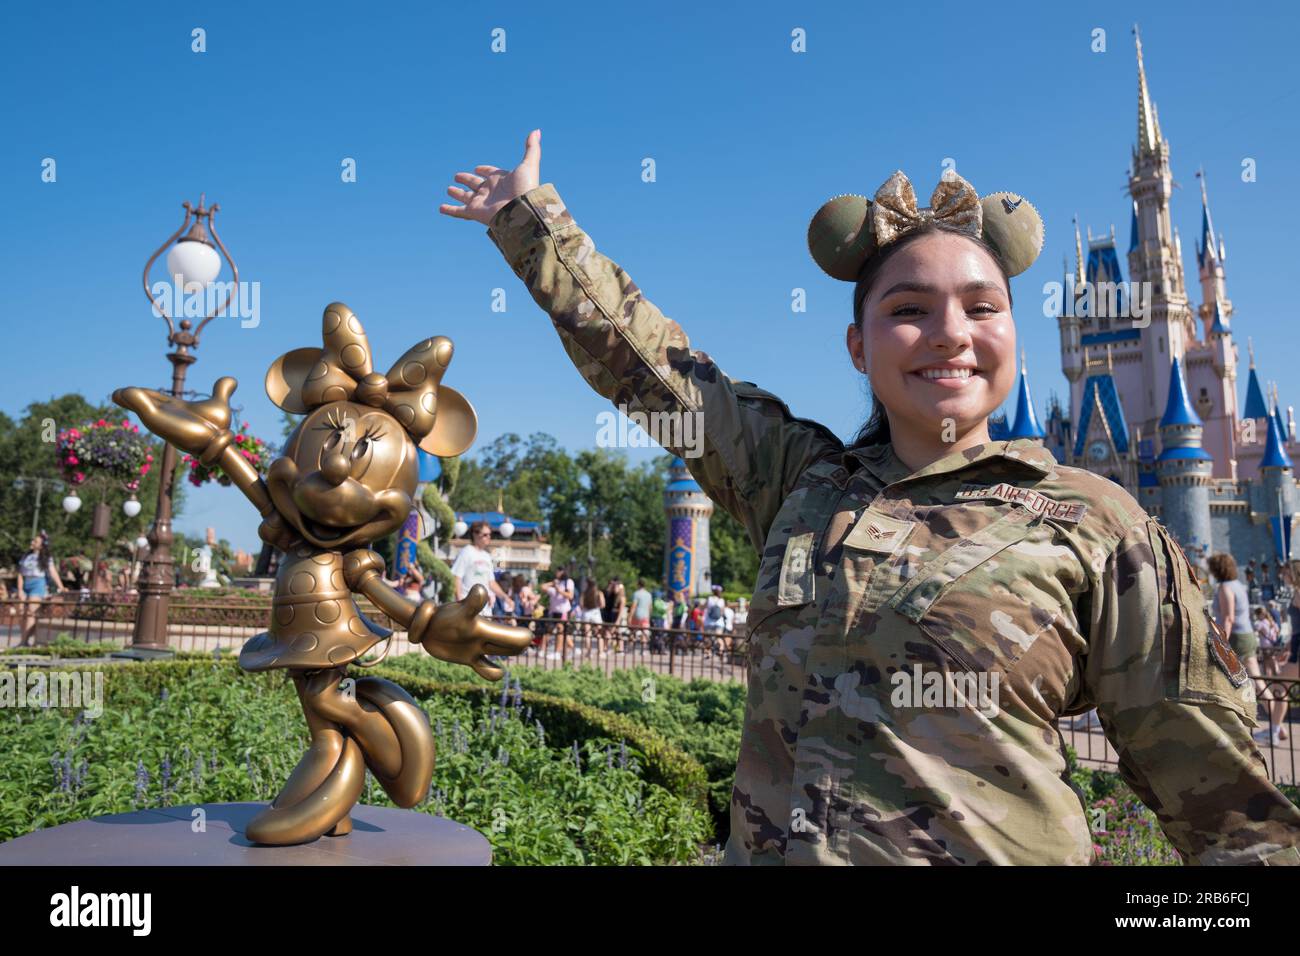 Orlando, United States. 04 July, 2023. U.S. Air Force Senior Airman Leandra Garcia, 33rd Fighter Wing public affairs specialist, poses next to a statue of Minnie Mouse during a flyover by their teams at Disney World, July 4, 2023 in Orlando, Florida, July 4, 2023. The flyover celebrated Independence Day and the 100th anniversary of Walt Disney Company.    Credit: SrA Joshua Hastings/U.S. Air Force/Alamy Live News Stock Photo